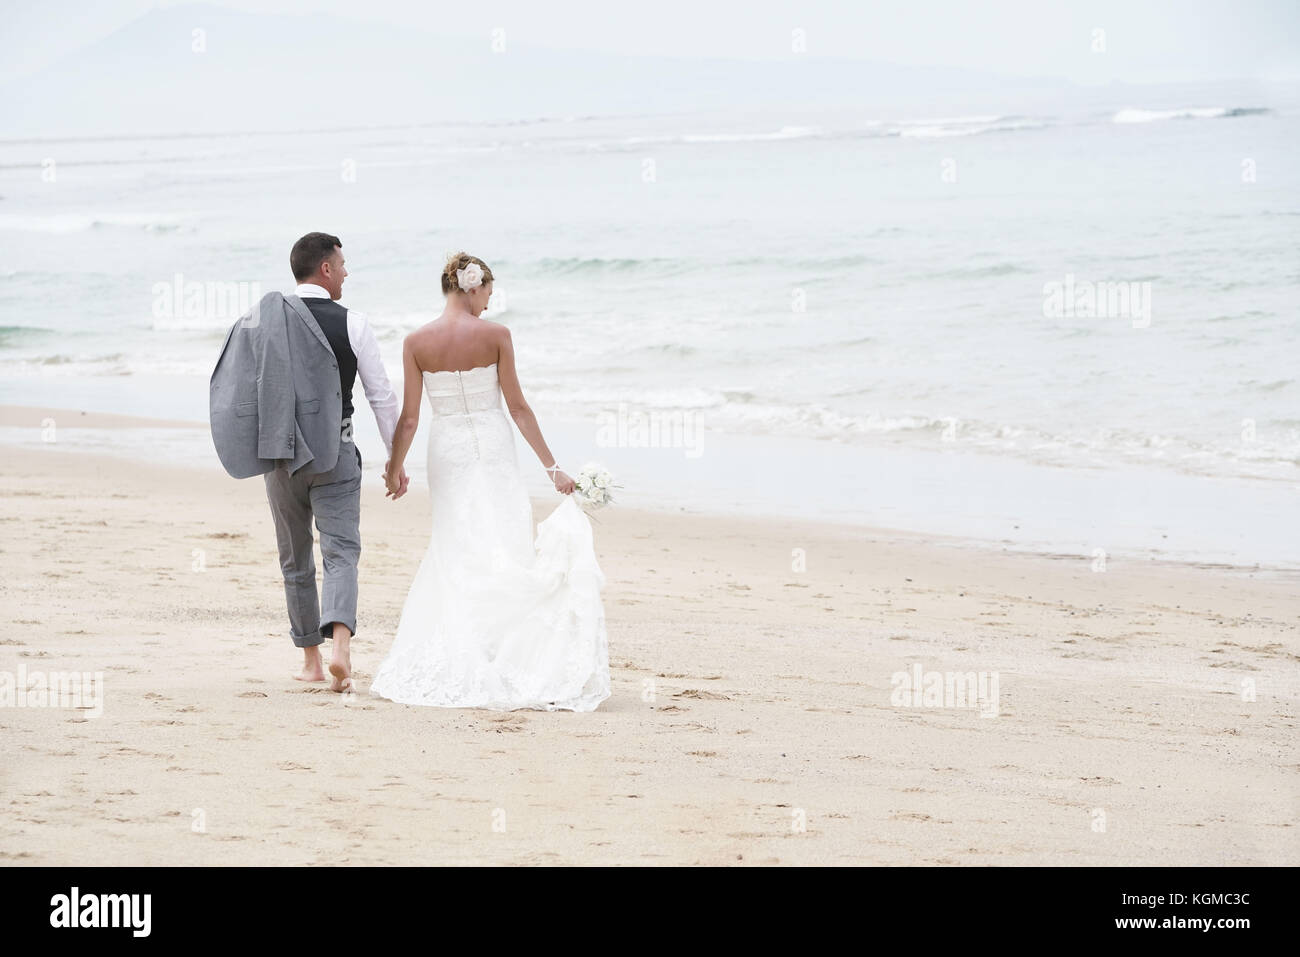 Back View Of Bride And Groom Walking On The Beach Stock Photo